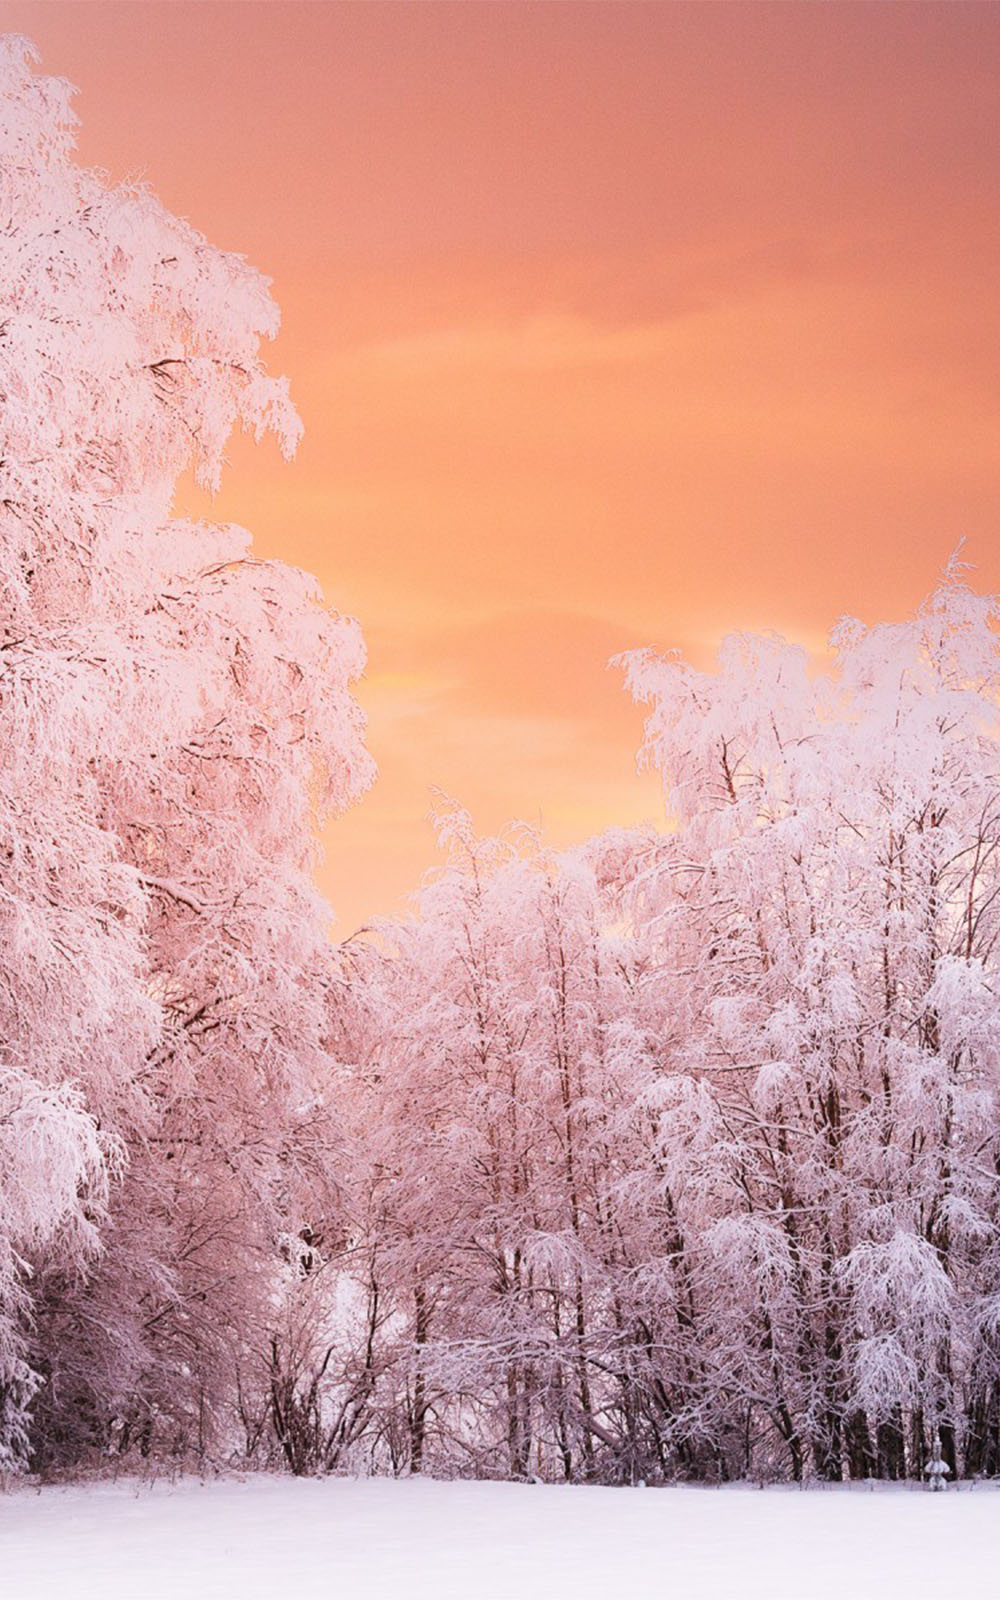 Heavenly Winter Forest Sunset Free HD Mobile Wallpaper